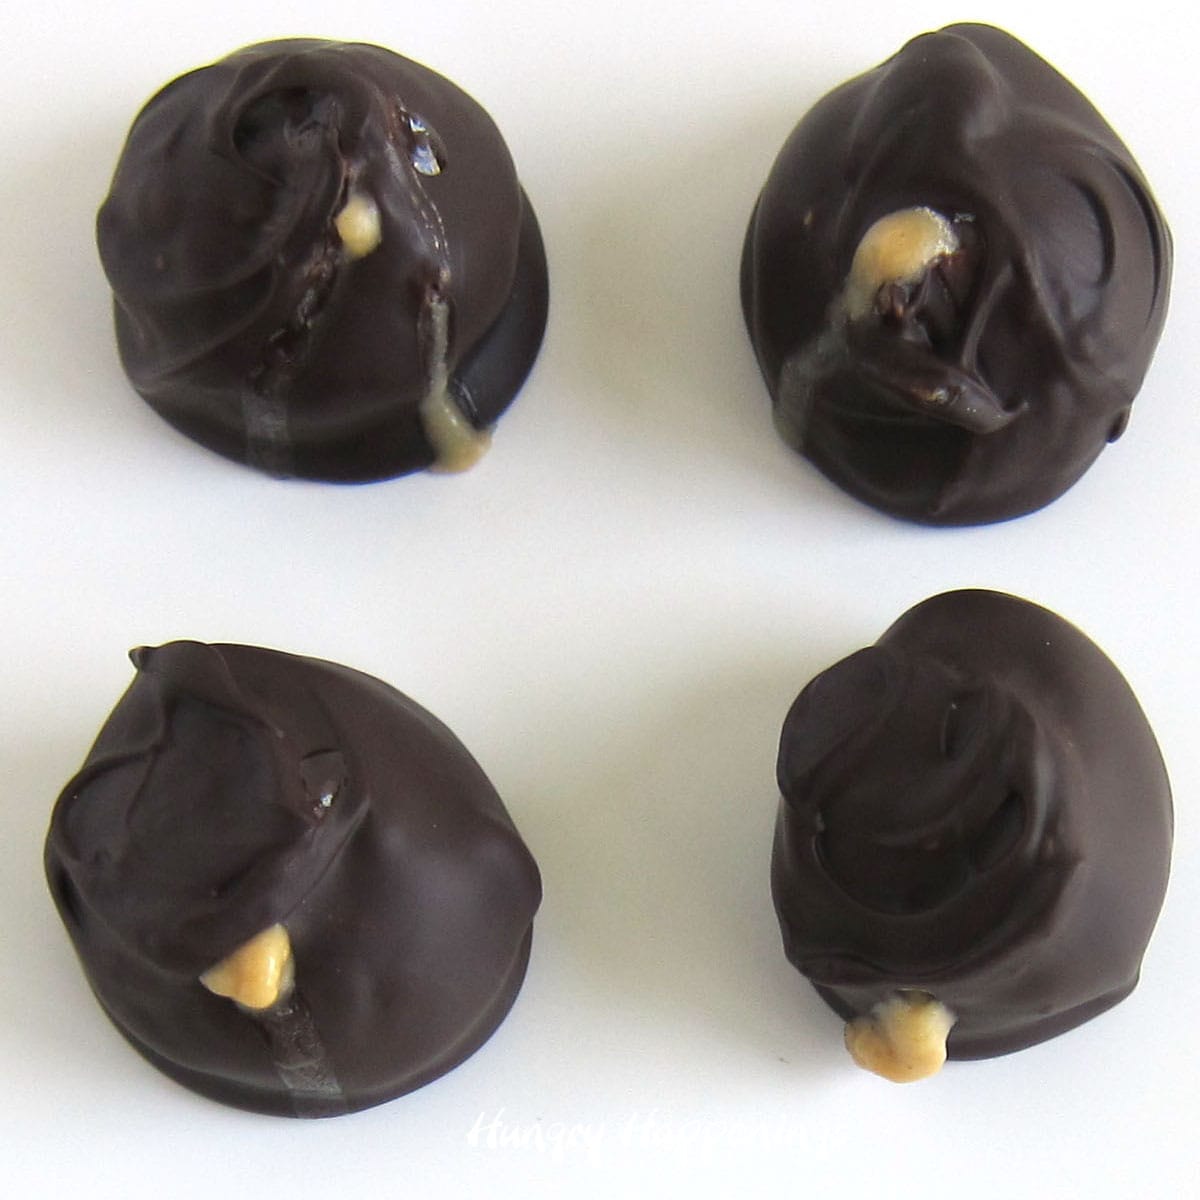 greasy peanut butter balls with filling oozing out of the chocolate